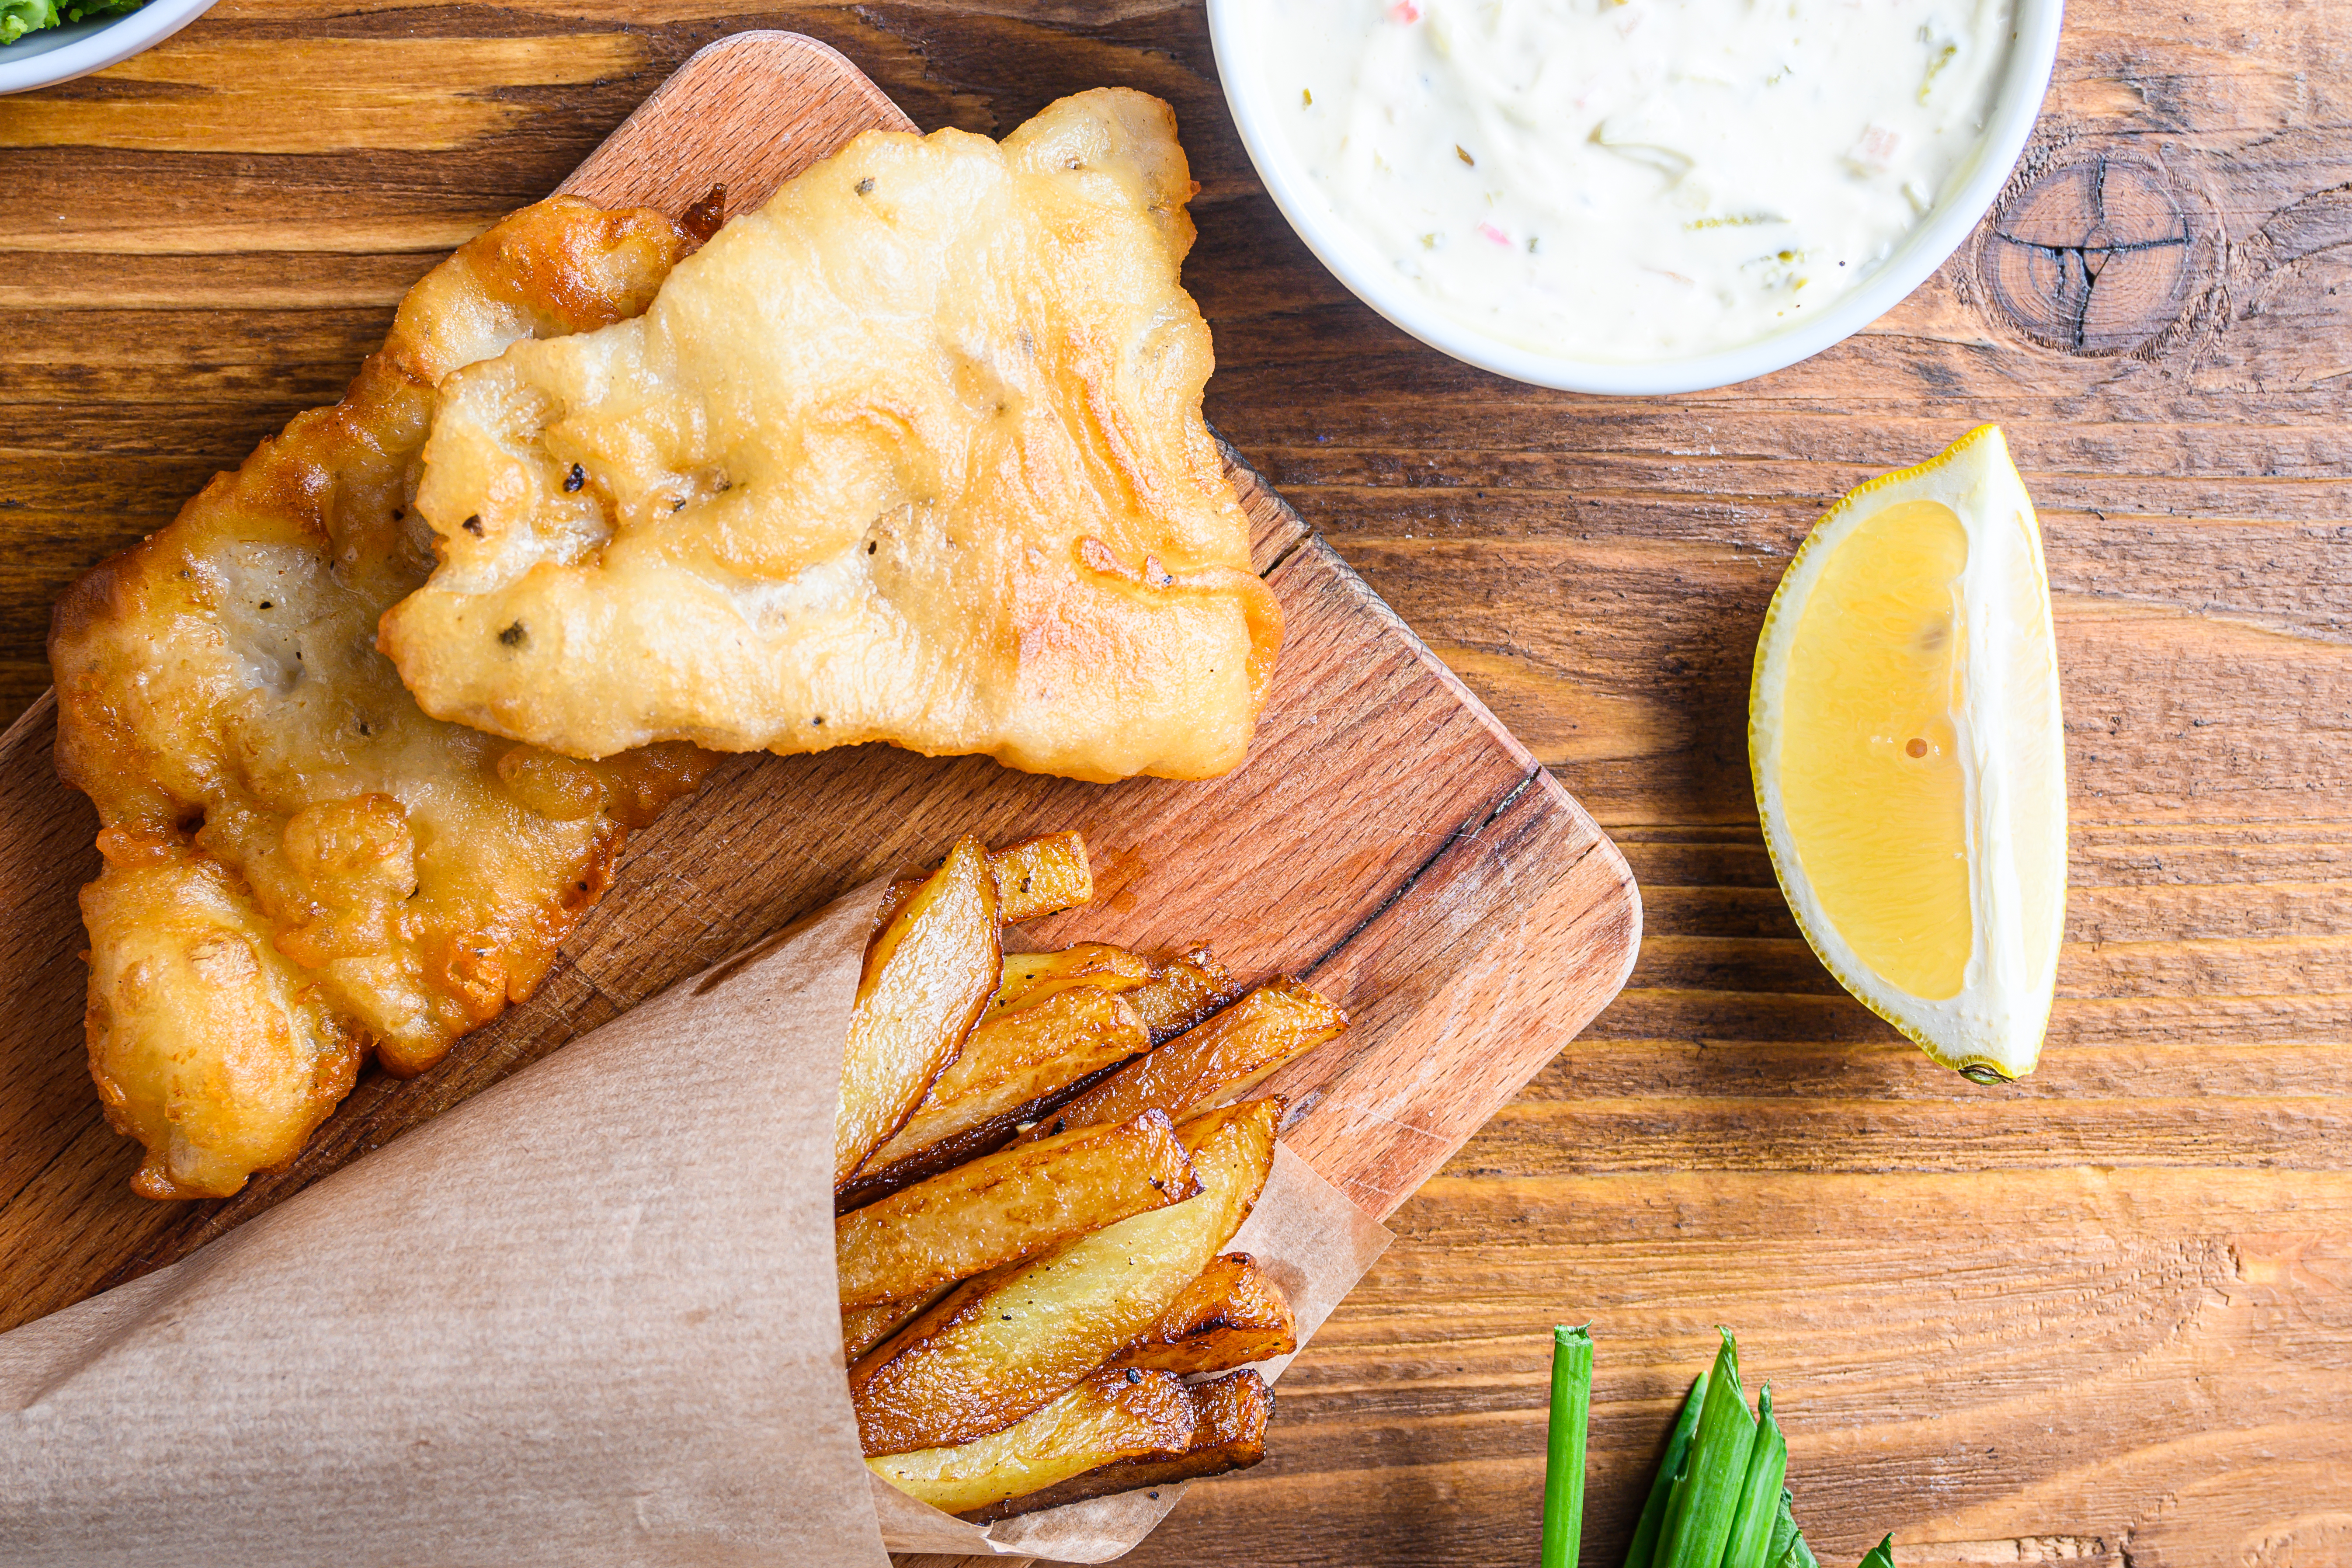 Detail of fish chips with dip and lemon, mashed minty peas, tartar sauce in paper cone  on wood chopping board dip and lemon - fried cod, french fries, lemon slices, tartar sauce, ketchup tomatoe served in the Pub or  over light old wooden planks table top view close up.